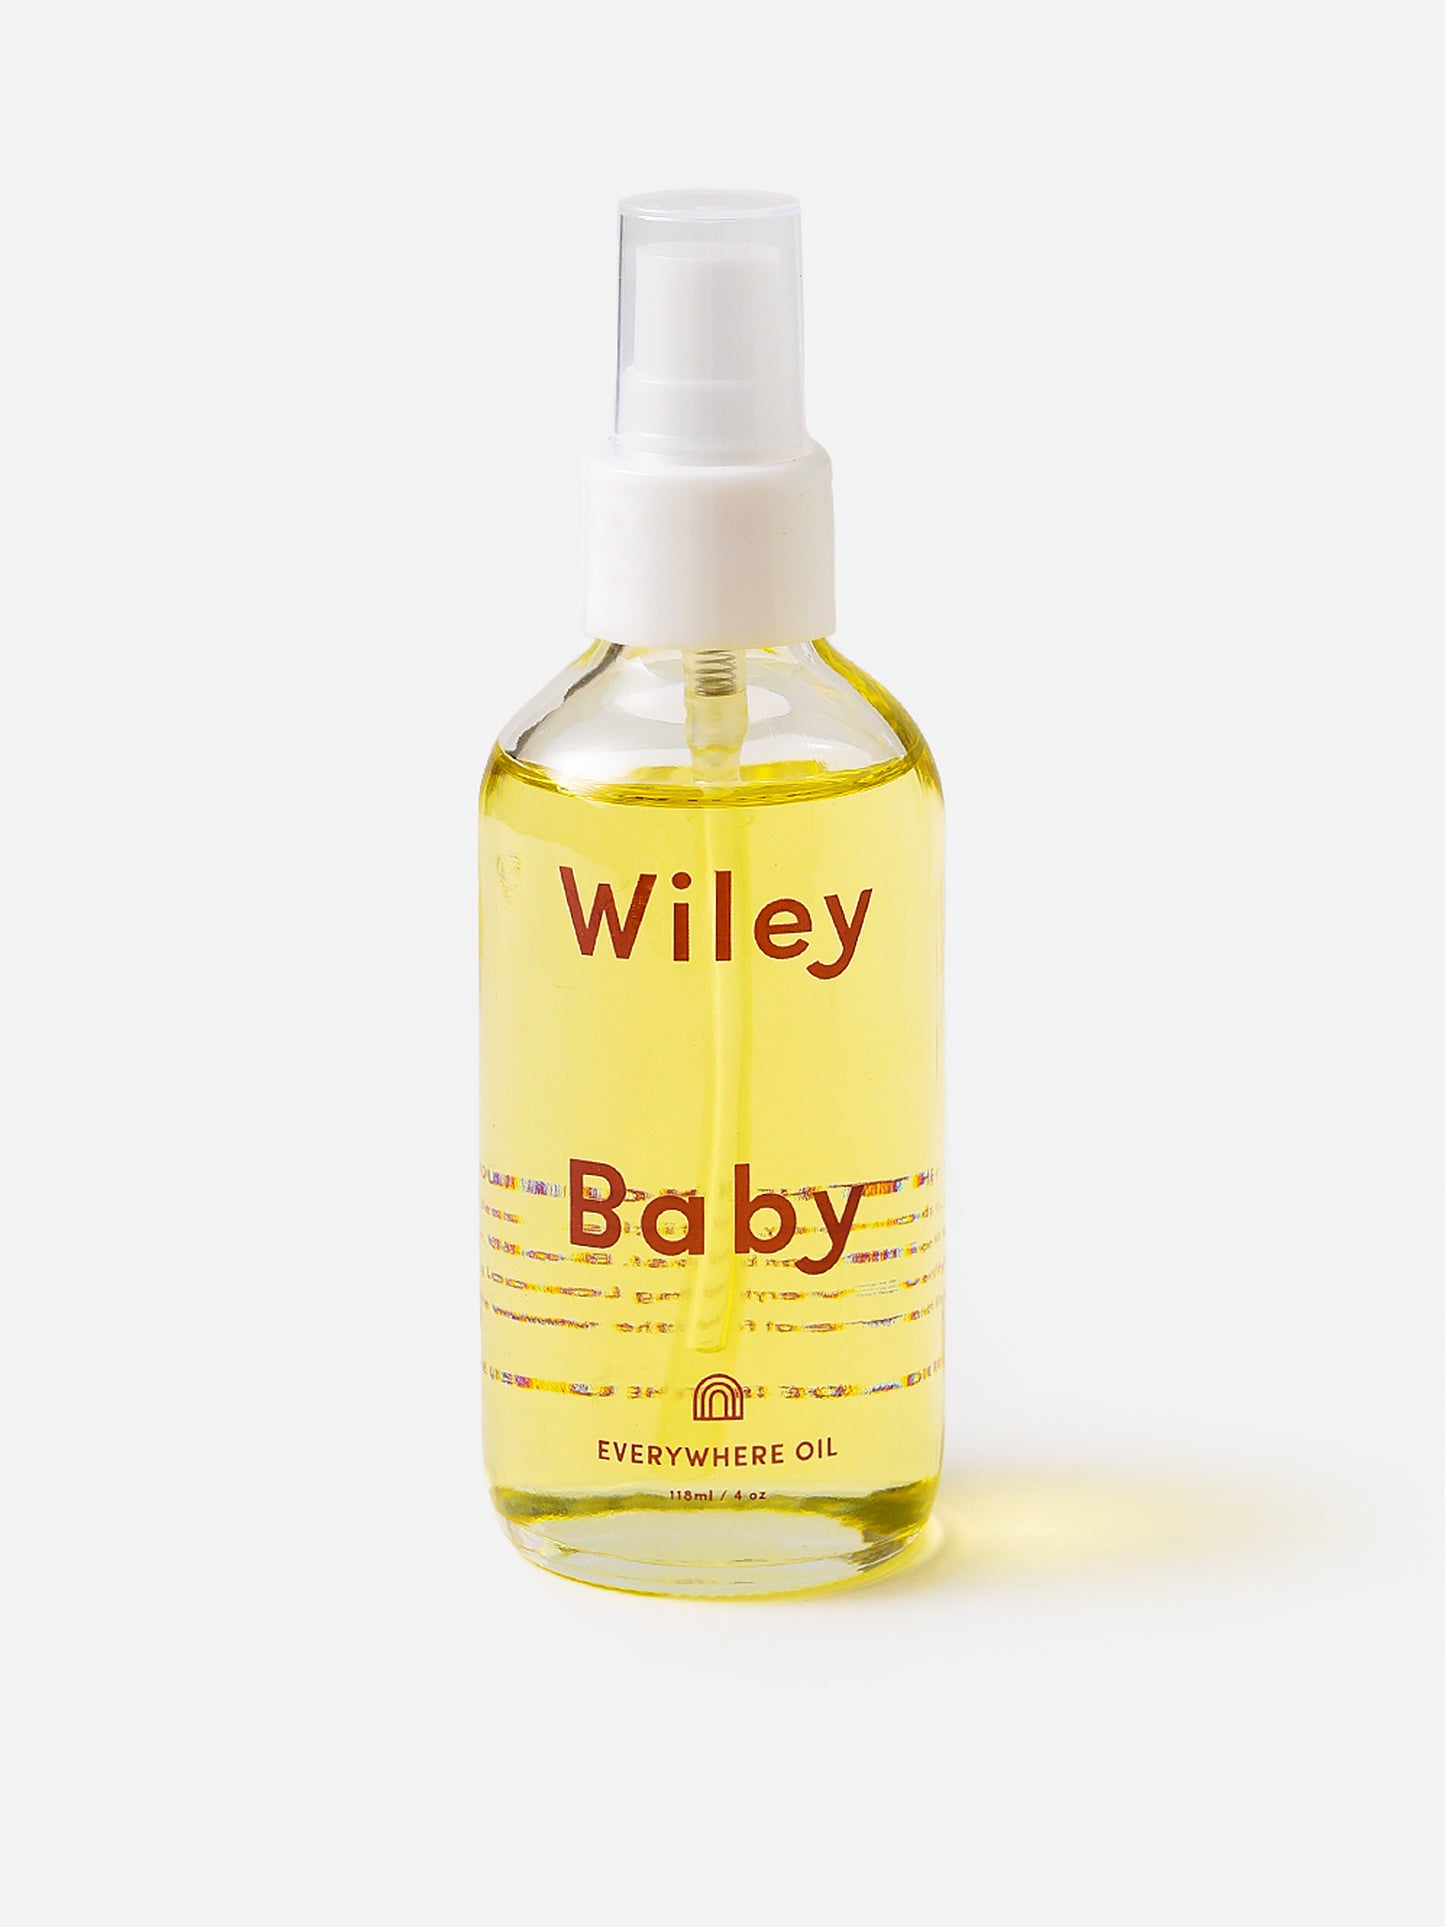 Wiley Body Baby Everywhere Oil